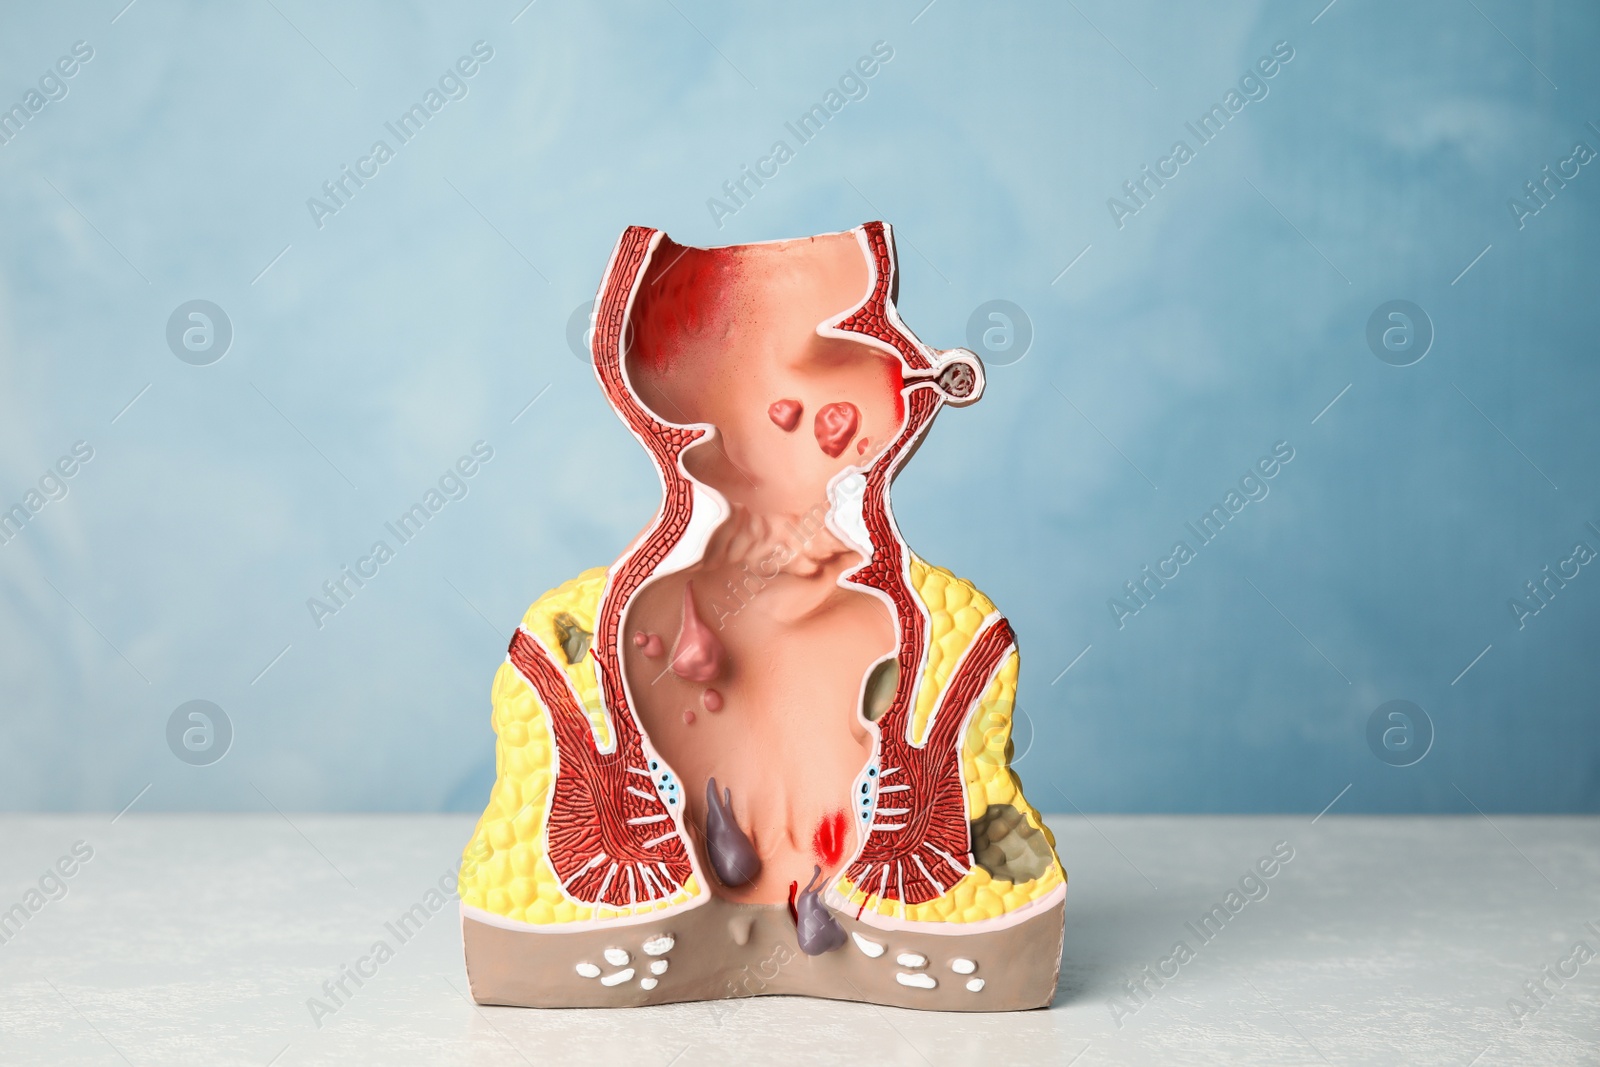 Photo of Model of unhealthy lower rectum with inflamed vascular structures on white table. Hemorrhoid problem